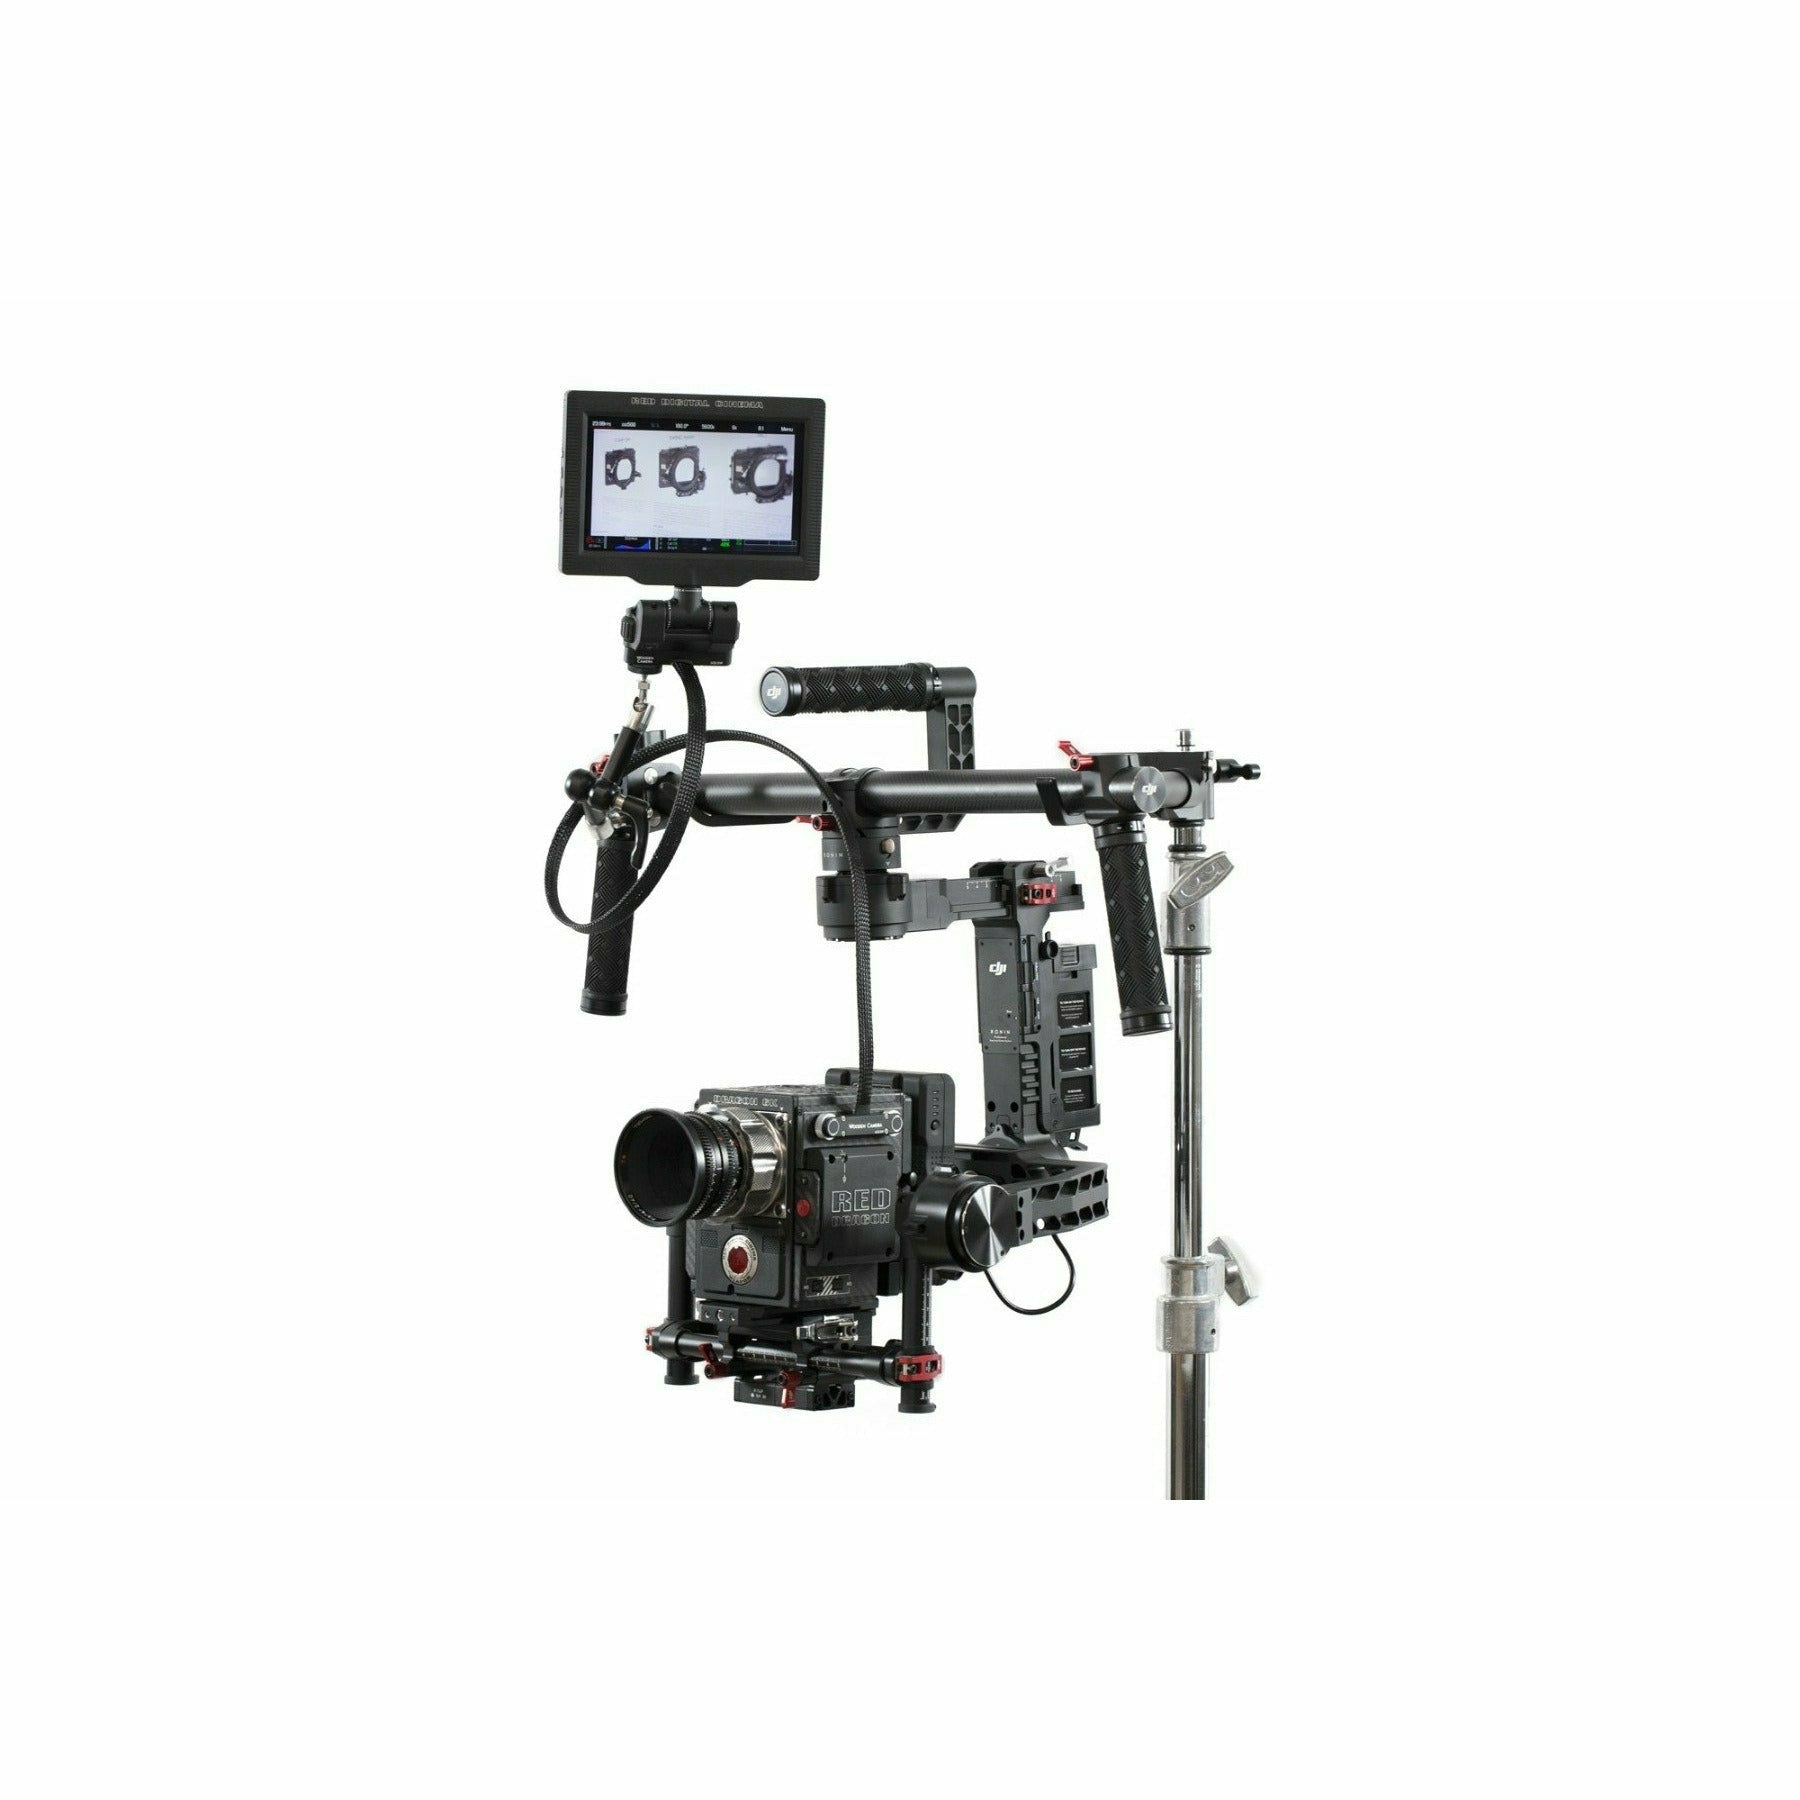 RED Male Pogo to Female Pogo LCD/EVF Cable (24inch, Weapon/Epic-W/Scarlet-W/Raven) - Dragon Image